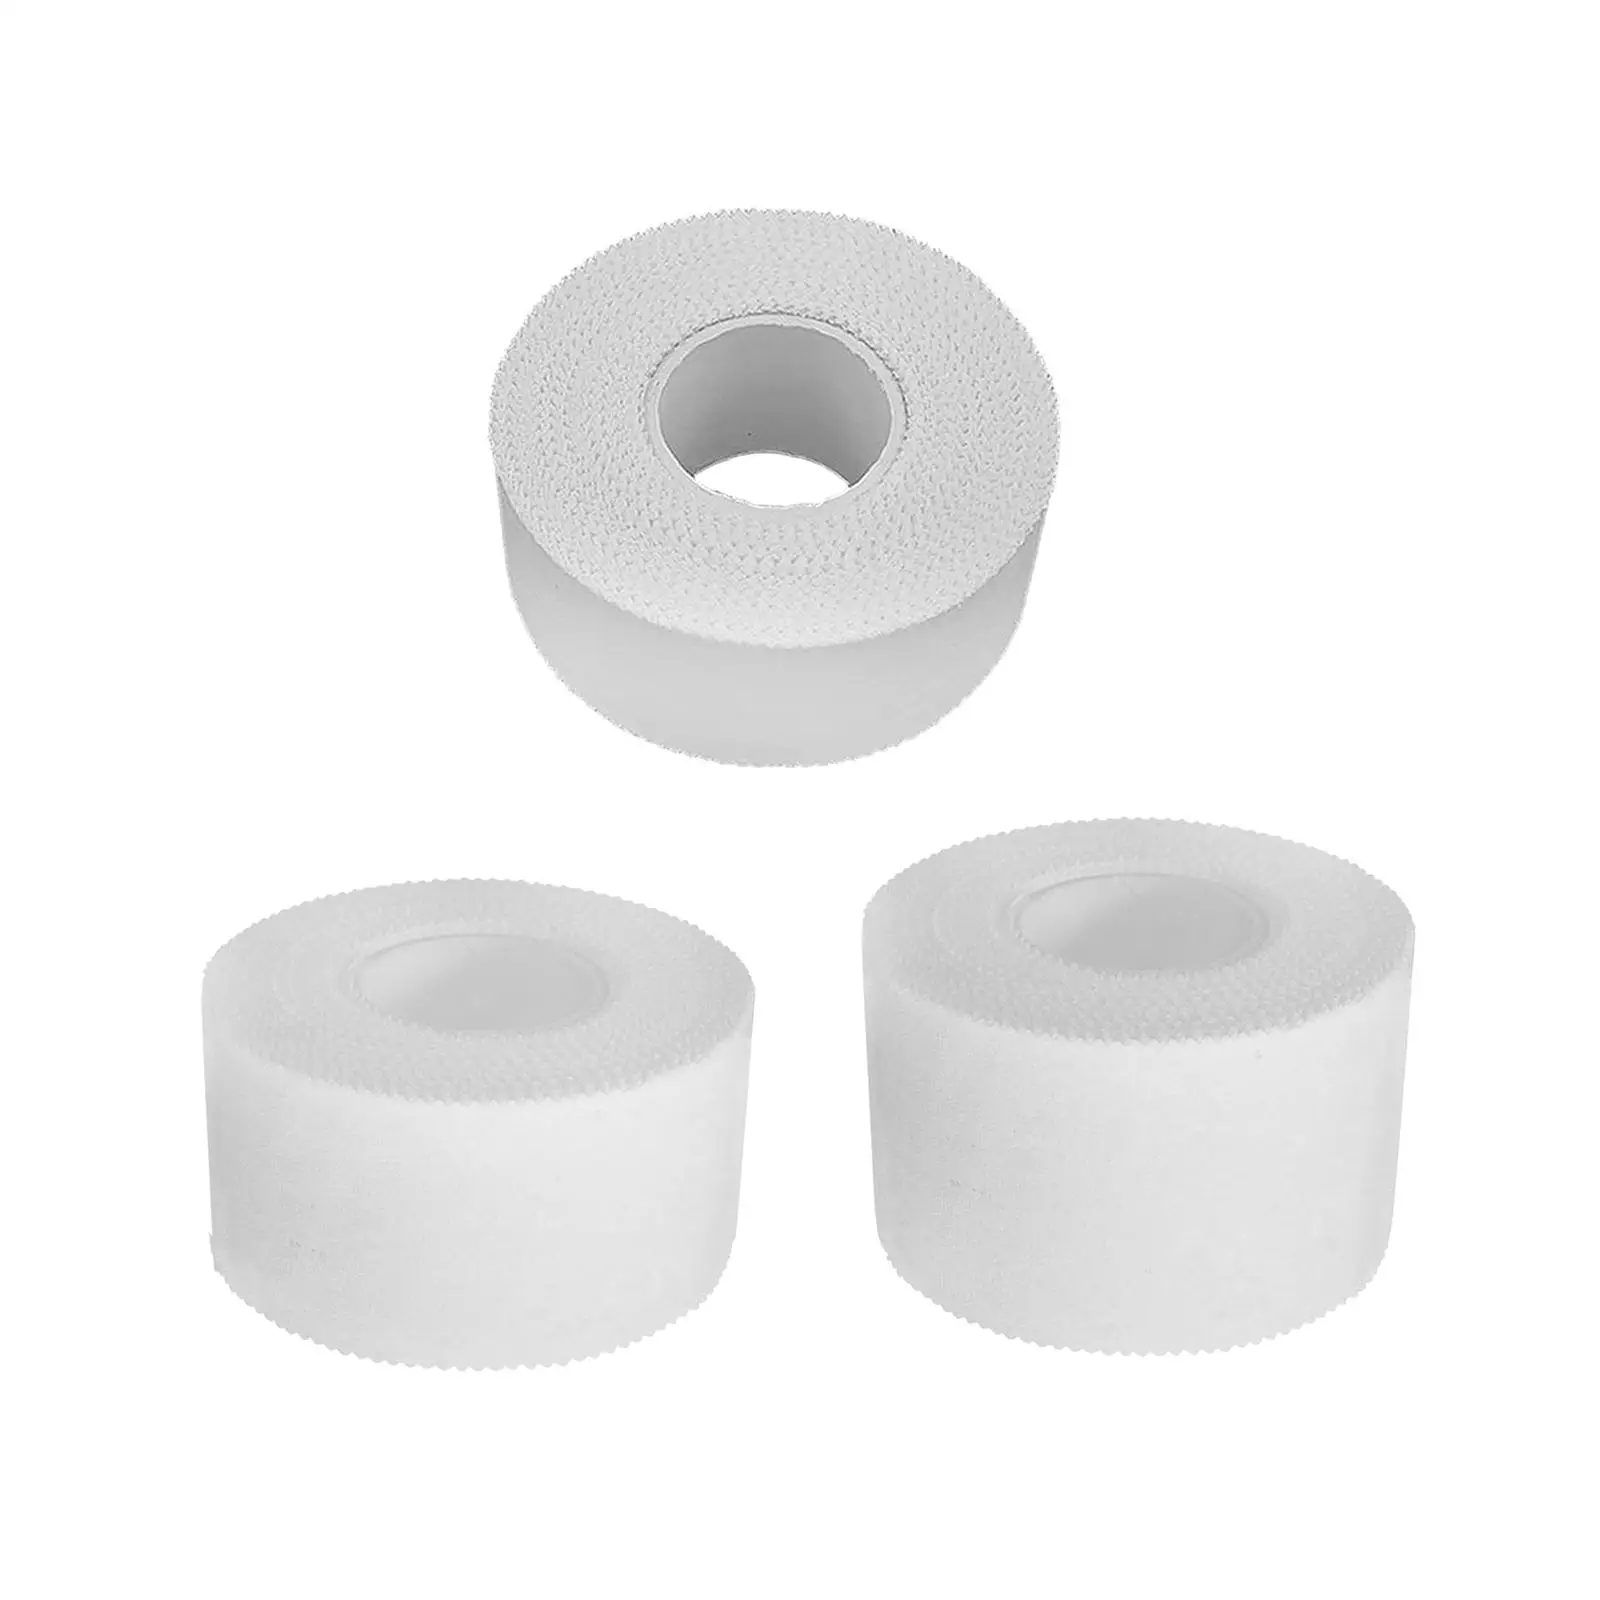 Sports Wrap Tape Athletic Tape Wrap Breathable Self Adhesive Protective Tape